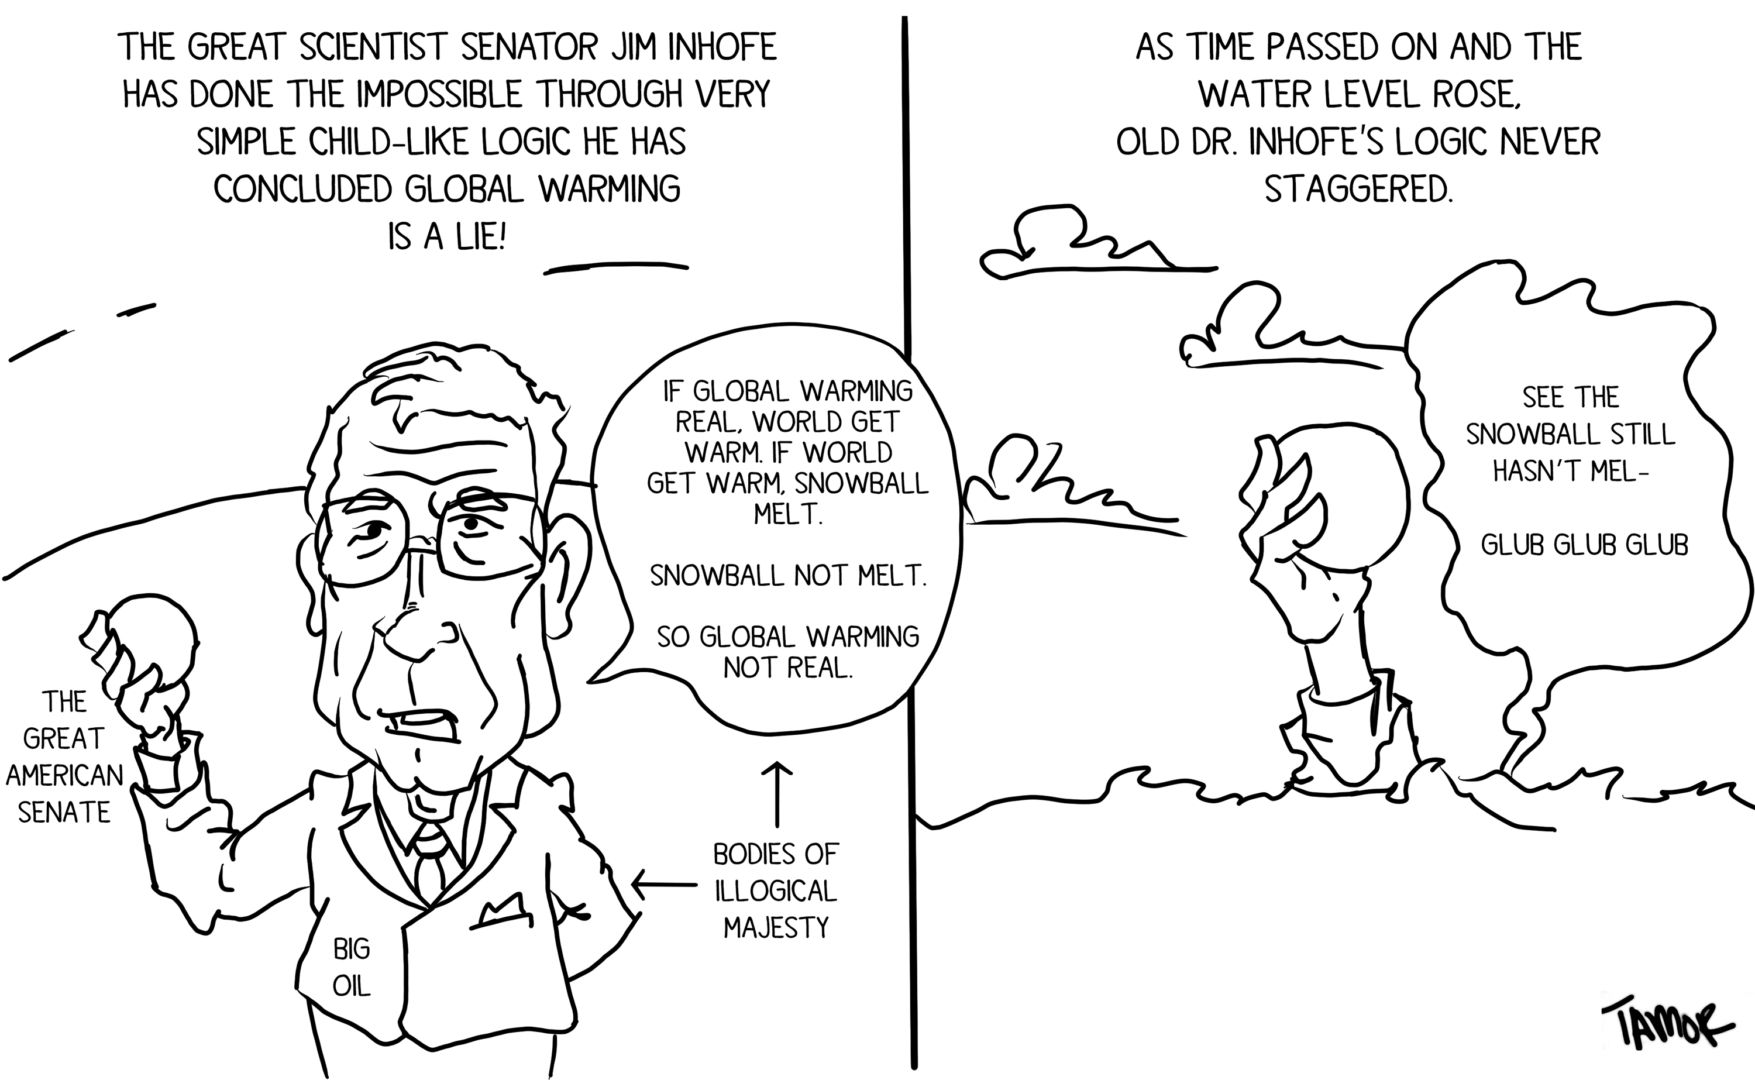 Cartoon: The snowball test proves climate change is a hoax - The Cougar